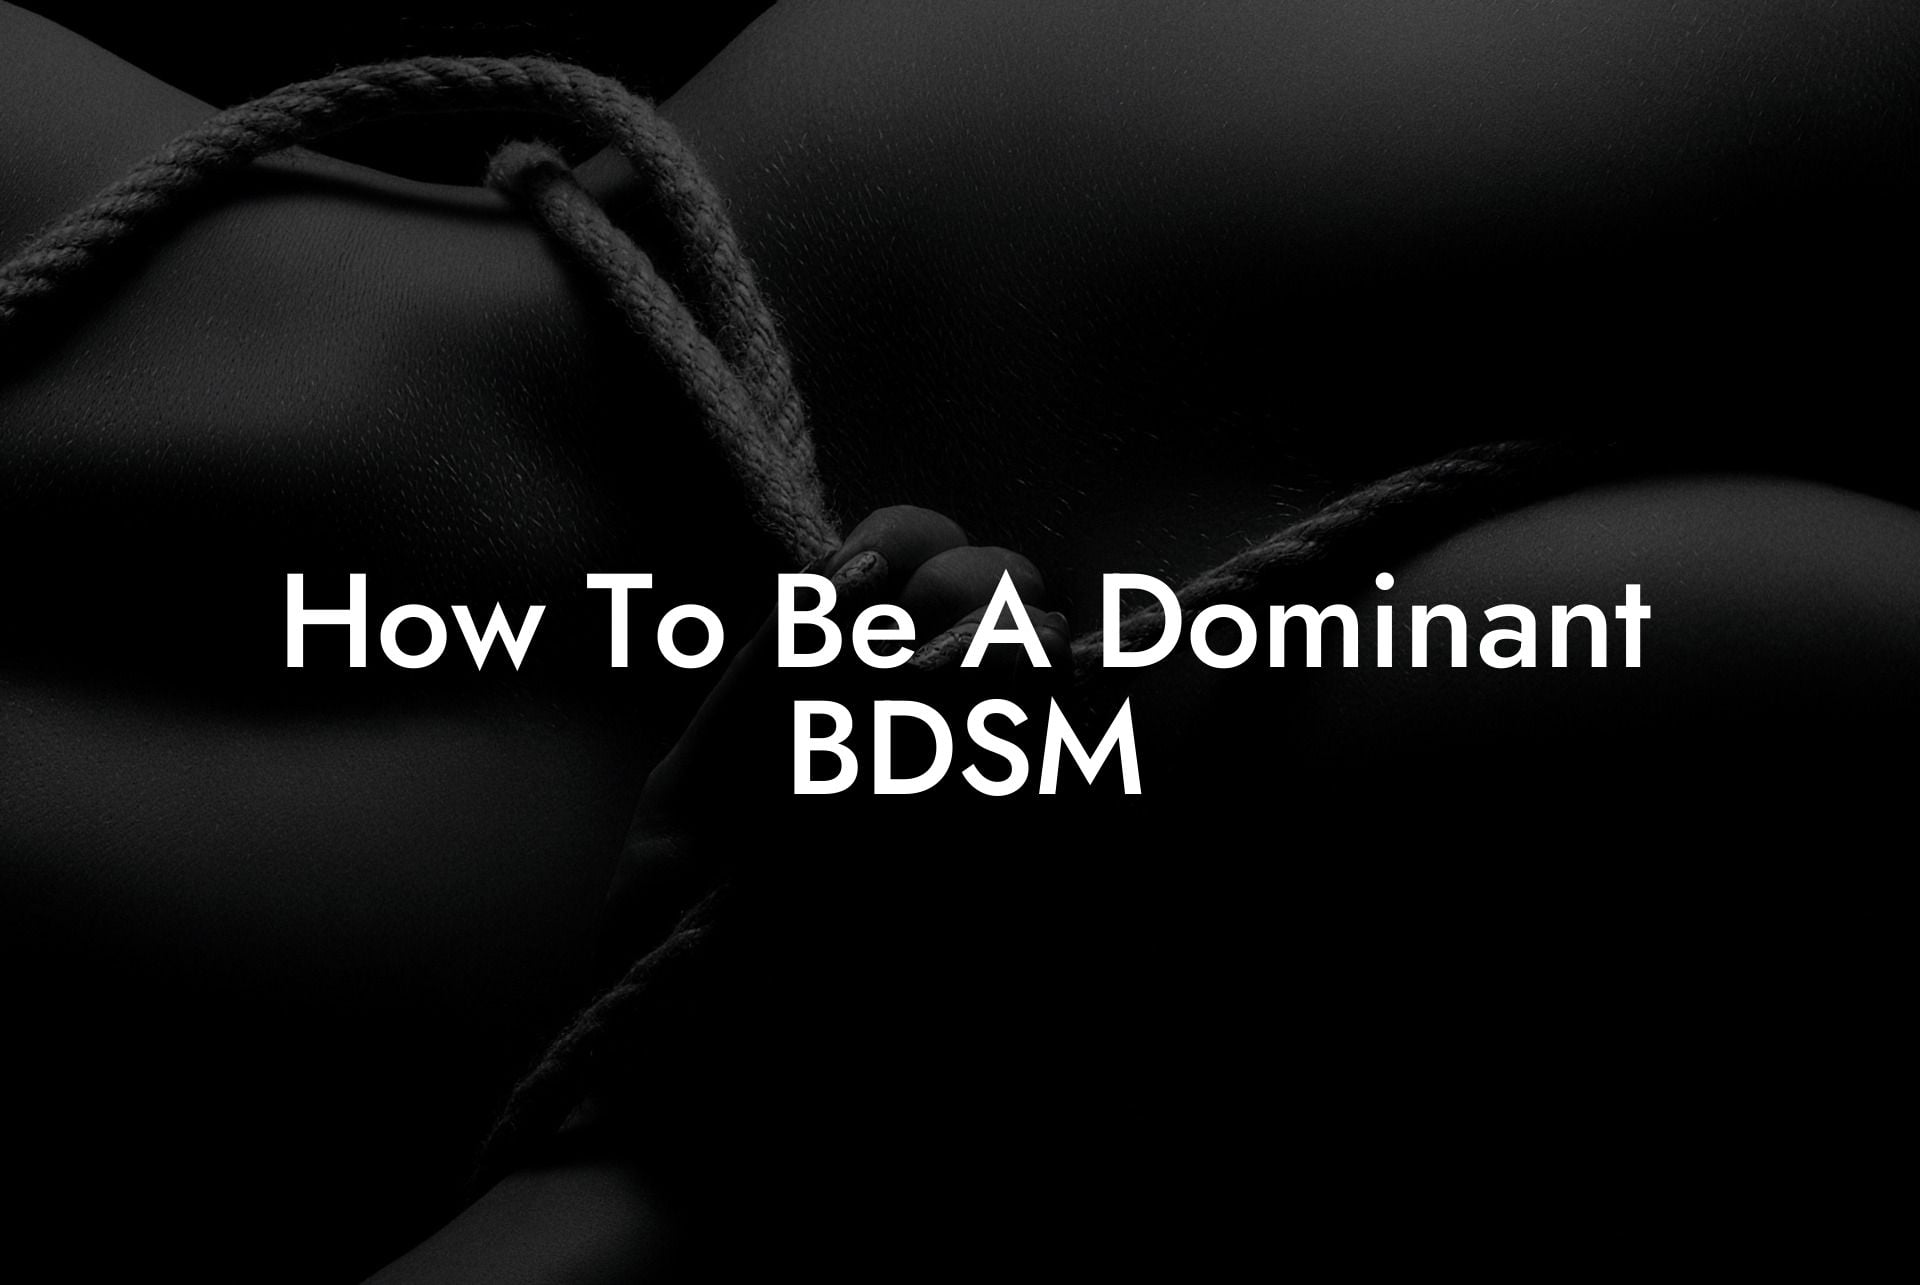 How To Be A Dominant BDSM